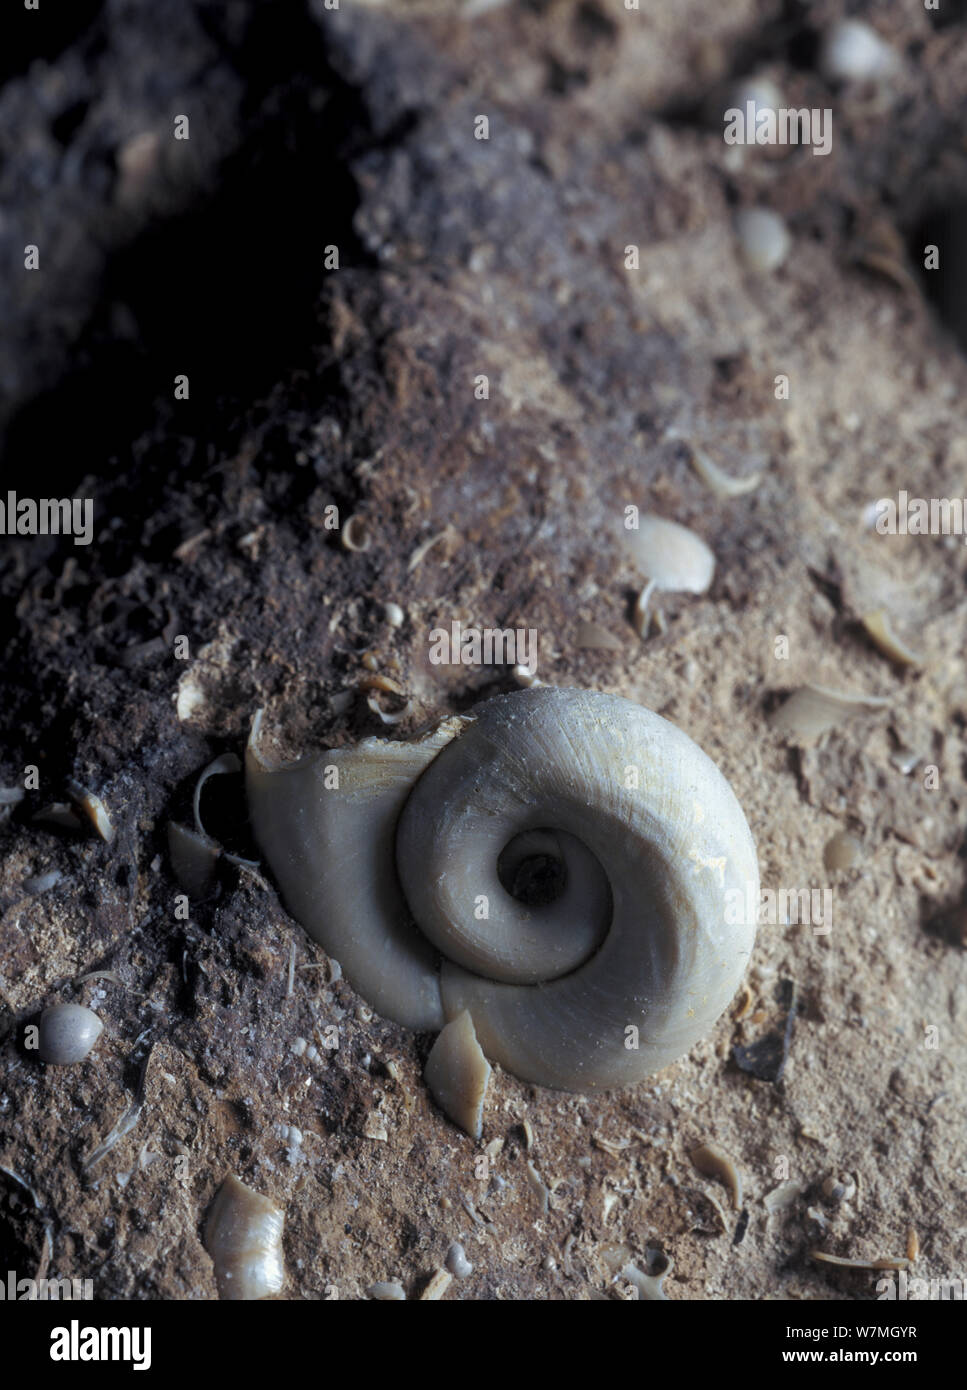 Fossil of freshwater snail (Planorbis sp) from the Miocene period, Albacete, Spain Stock Photo